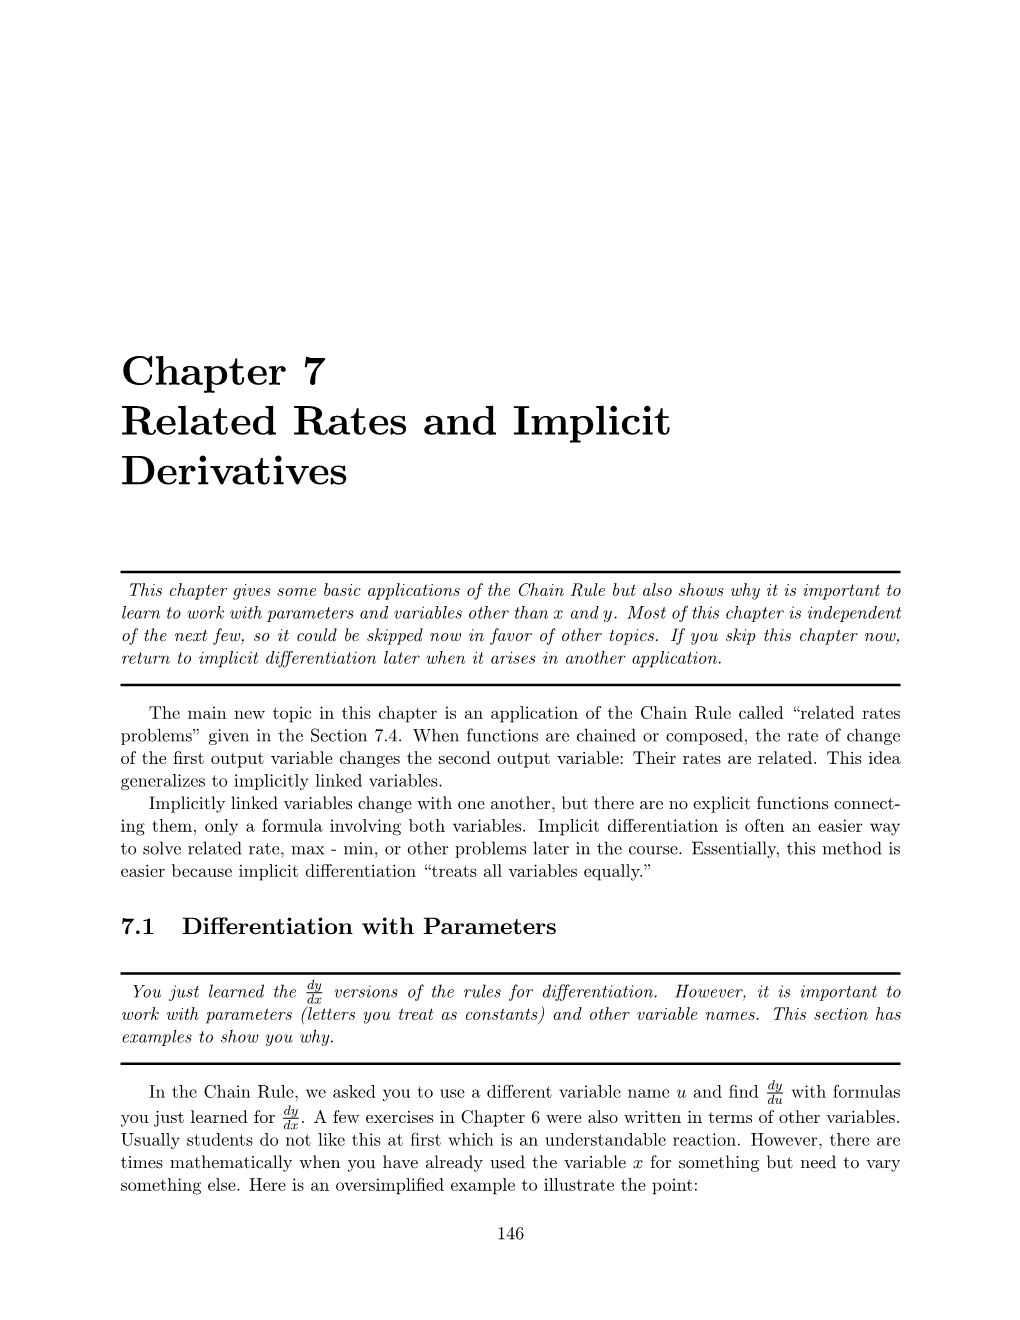 Chapter 7 Related Rates and Implicit Derivatives